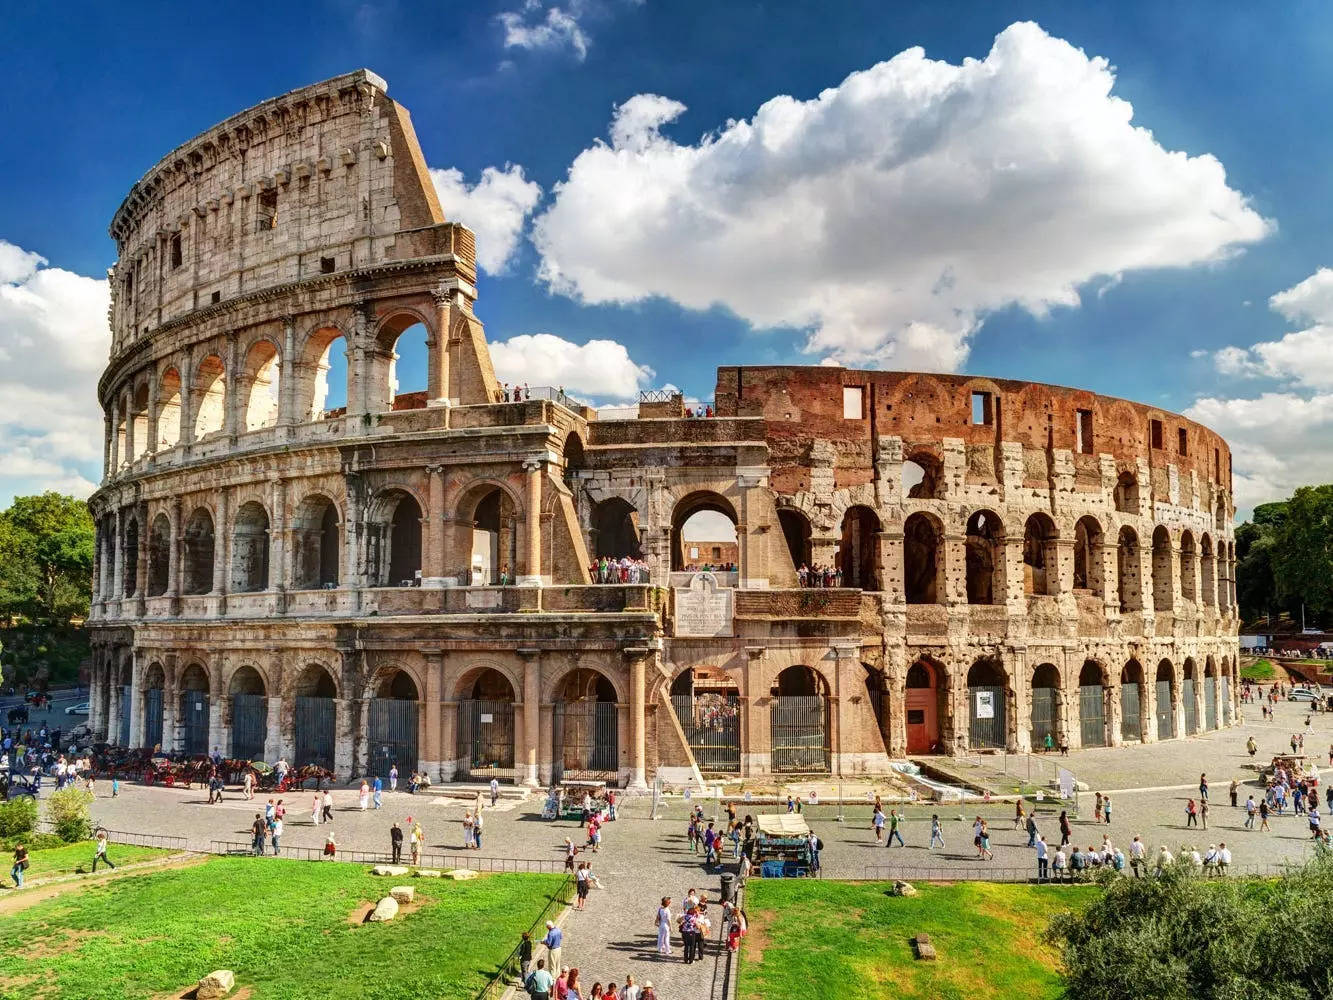 tourist who defaced colosseum